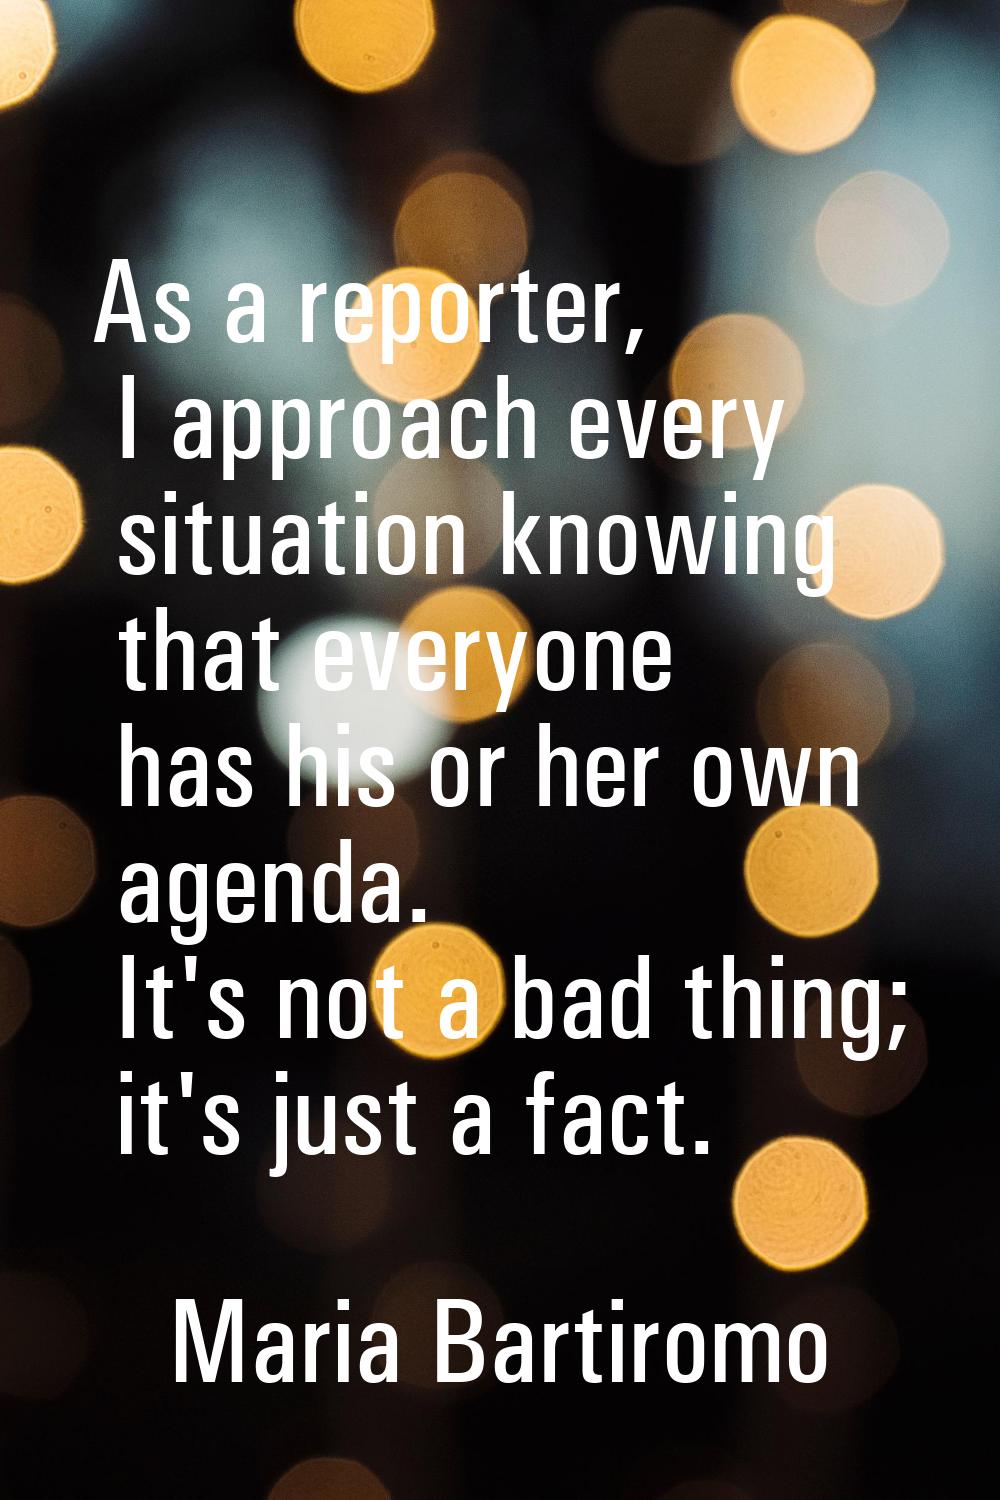 As a reporter, I approach every situation knowing that everyone has his or her own agenda. It's not